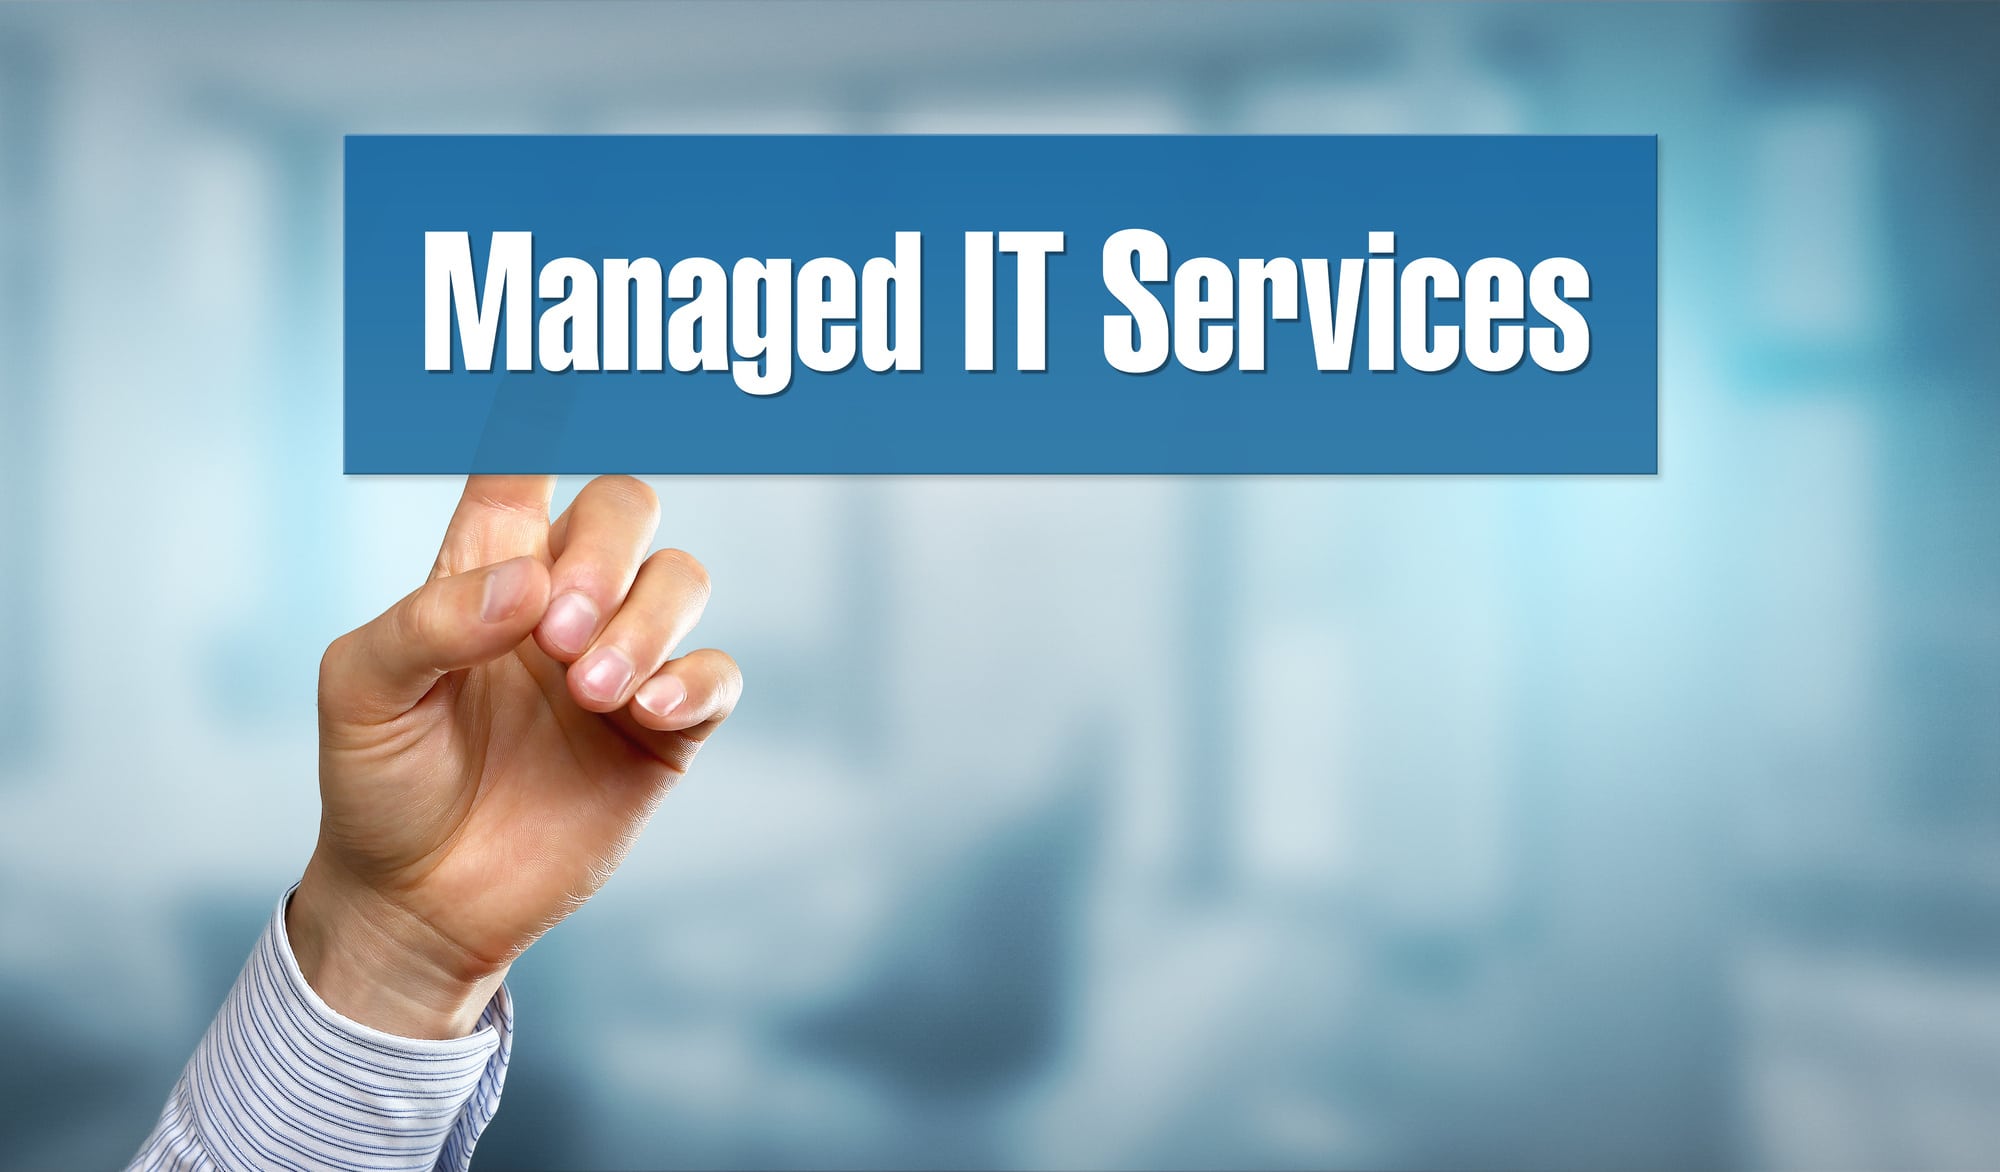 How to Decide If Managed IT Services Are Right For Your Business